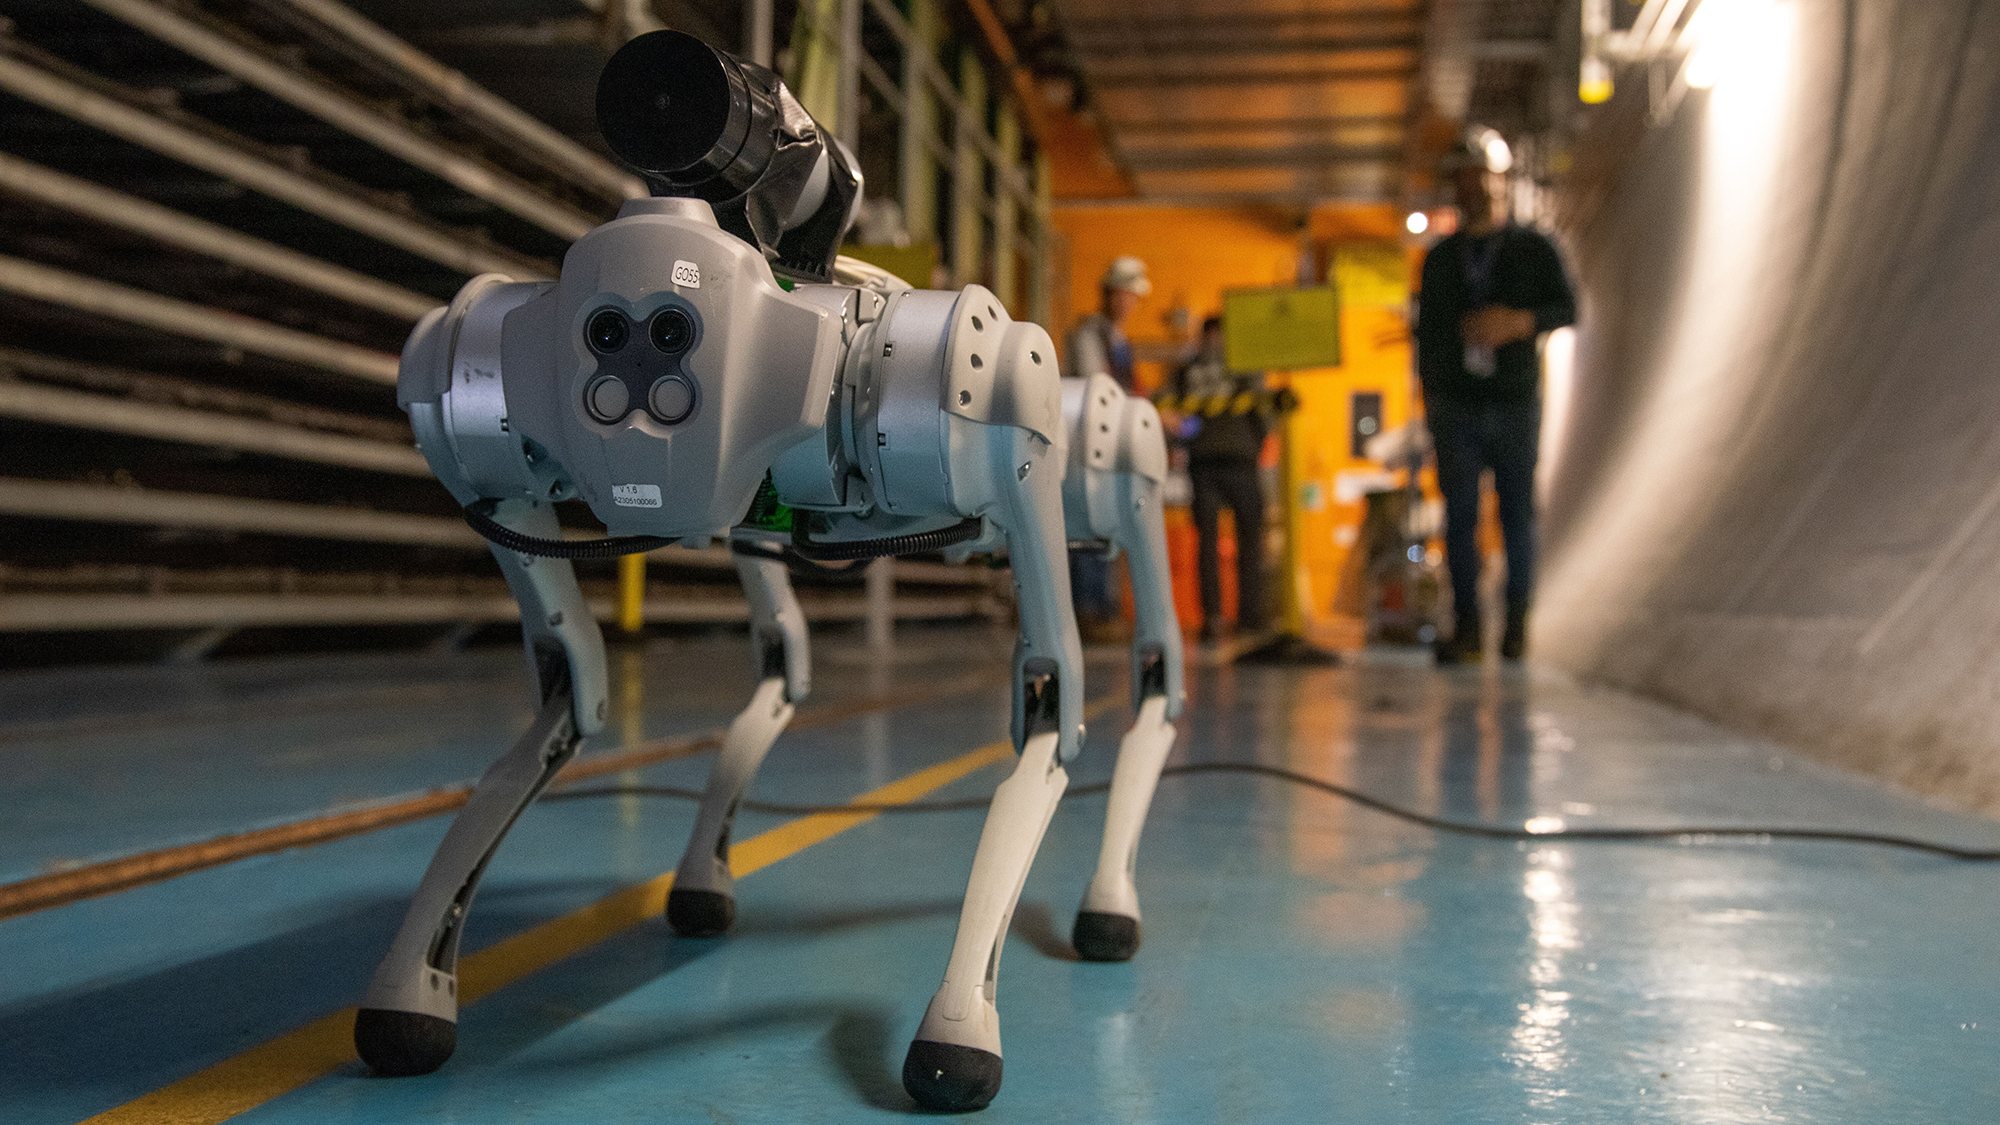 A four-legged ‘Robodog’ is patrolling the Large Hadron Collider